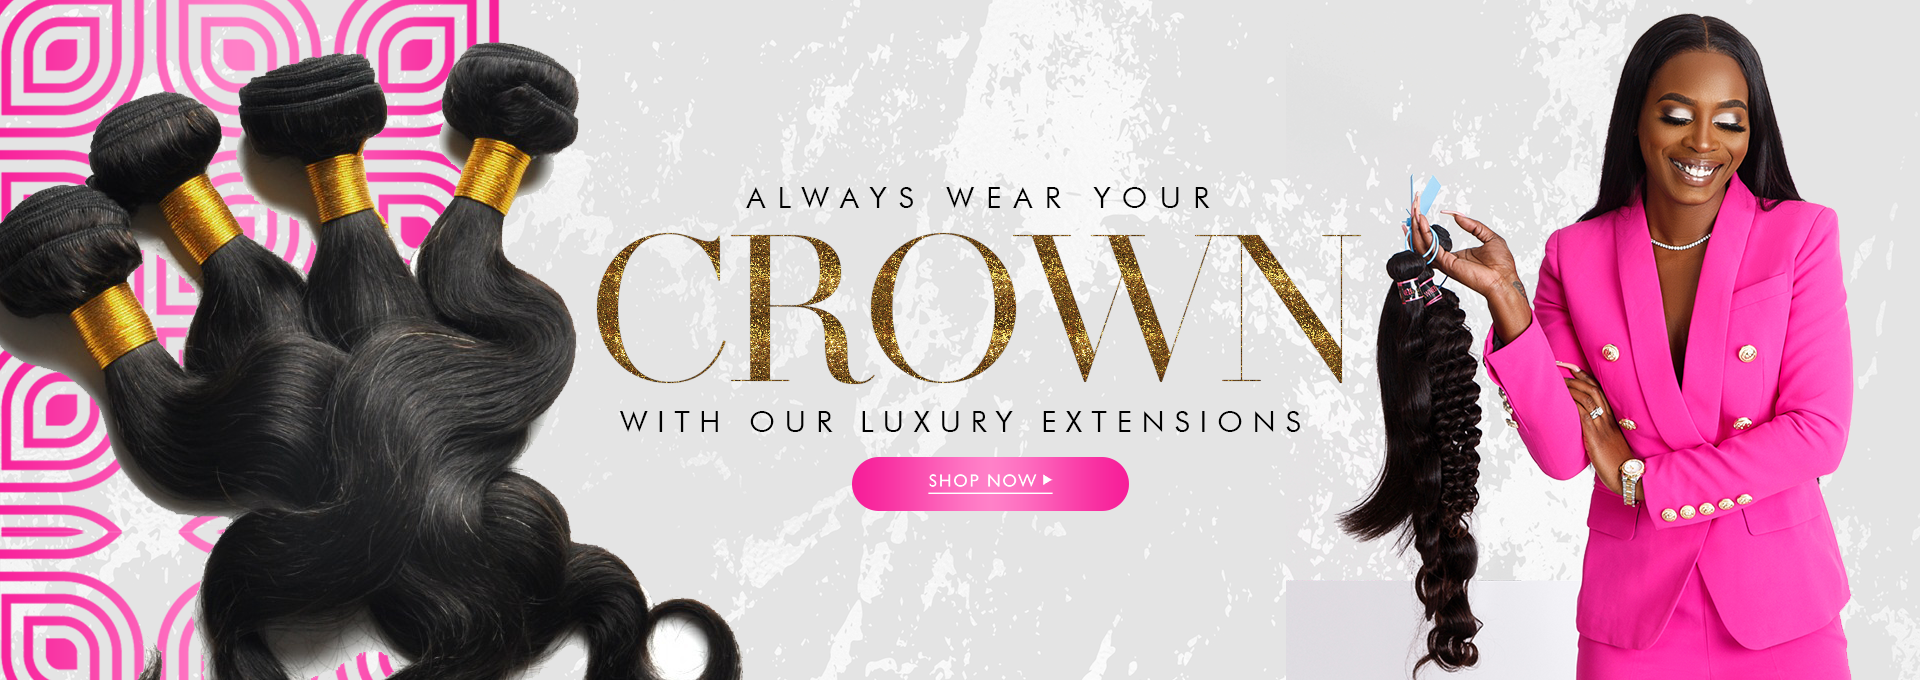 Crowned Lux